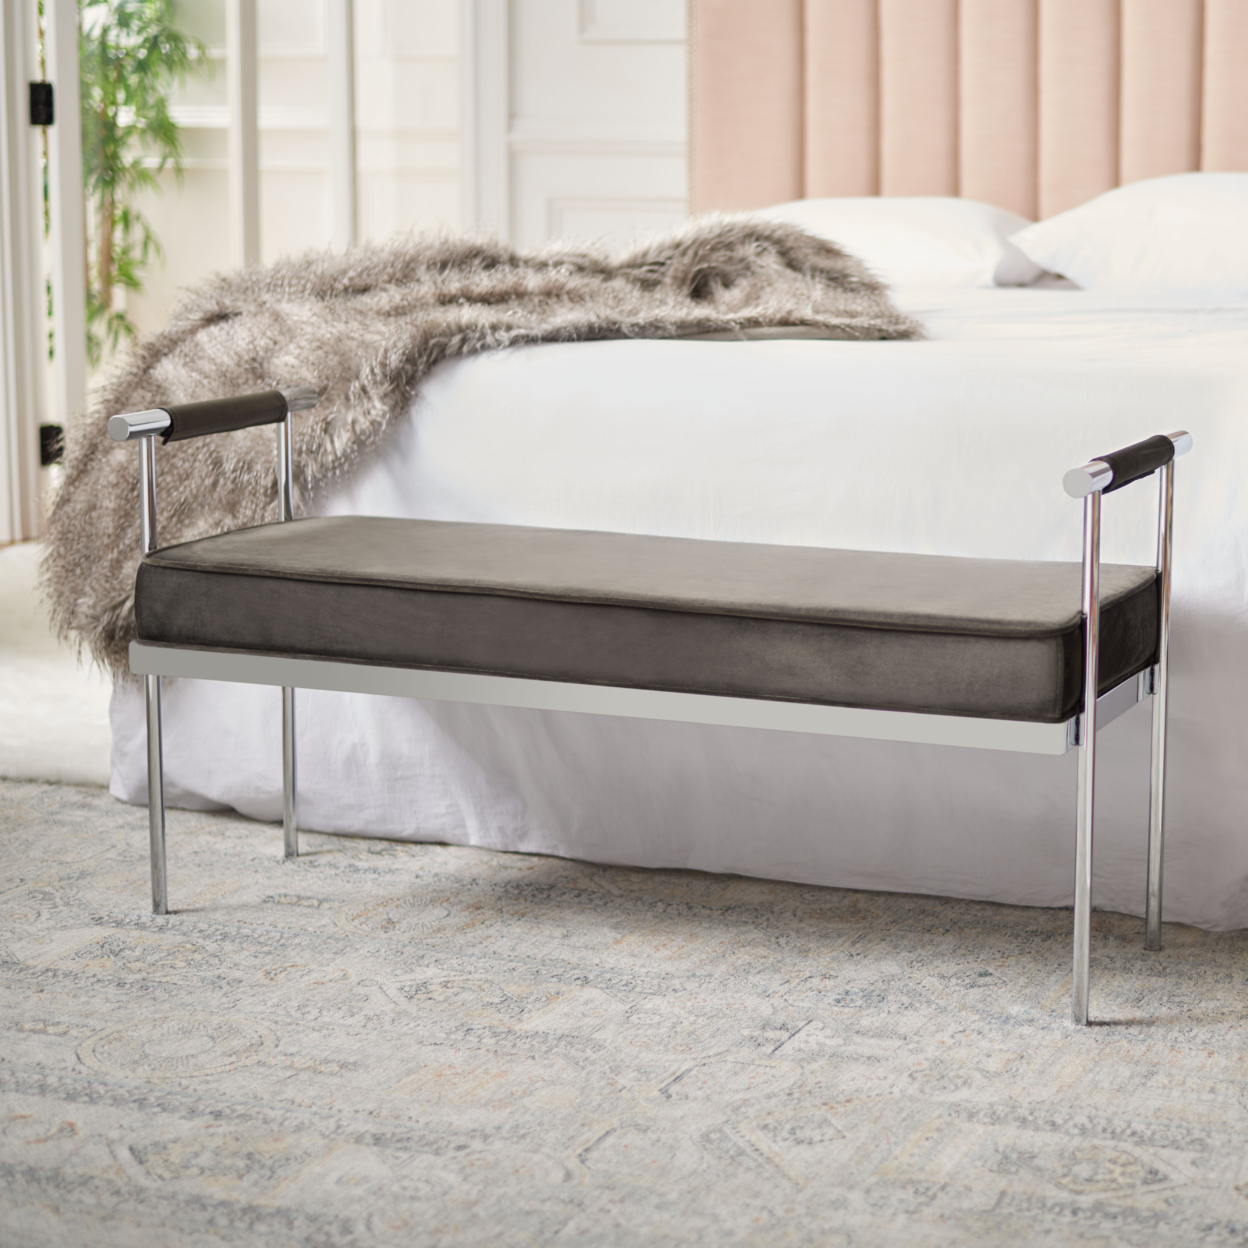 SAFAVIEH Pim Long Rectangle Bench With Arms Shale/ Chrome